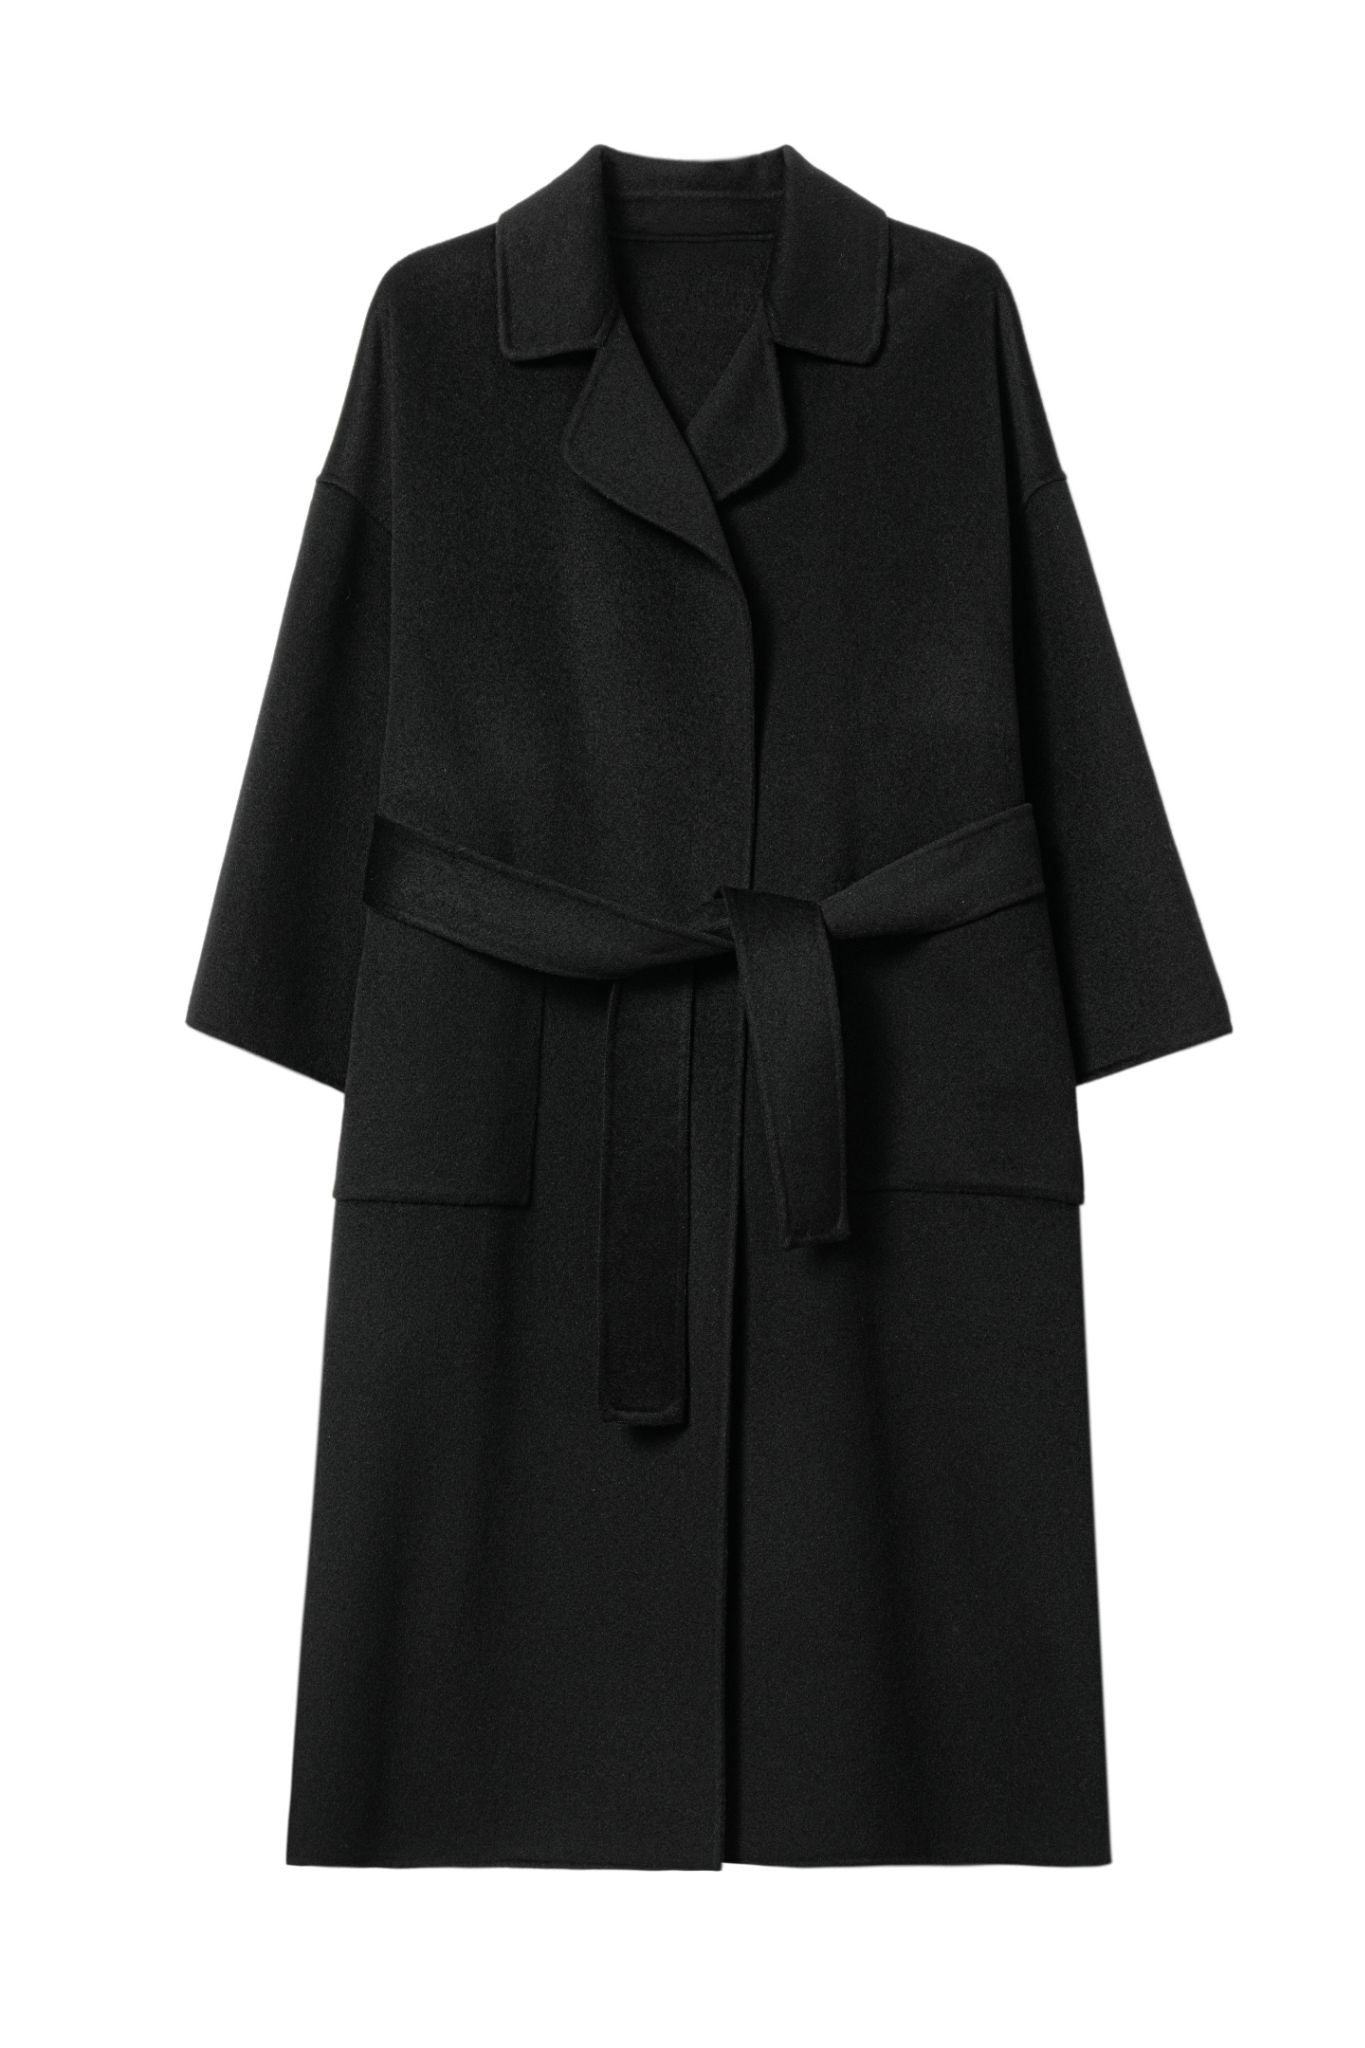 Wrapped in Luxury: Cashmere Coats for Every Occasion